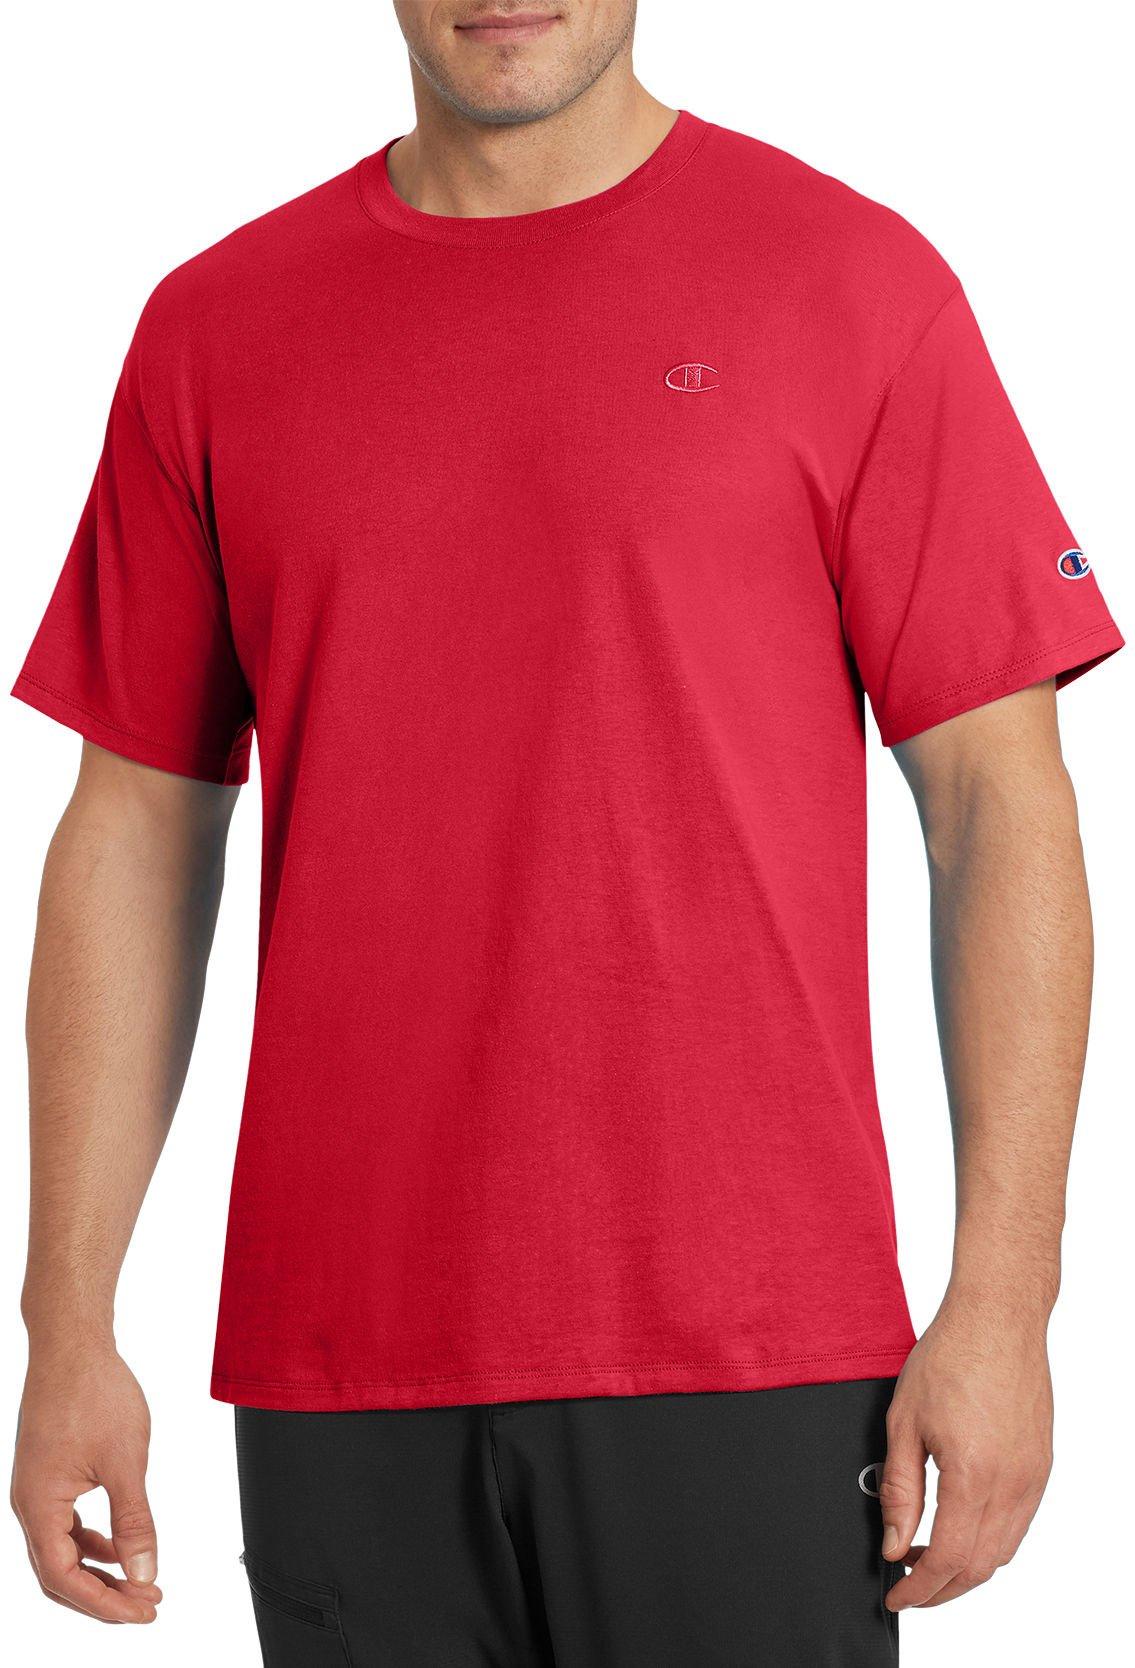 Champion Mens Classic Jersey Solid Athletic Shirt